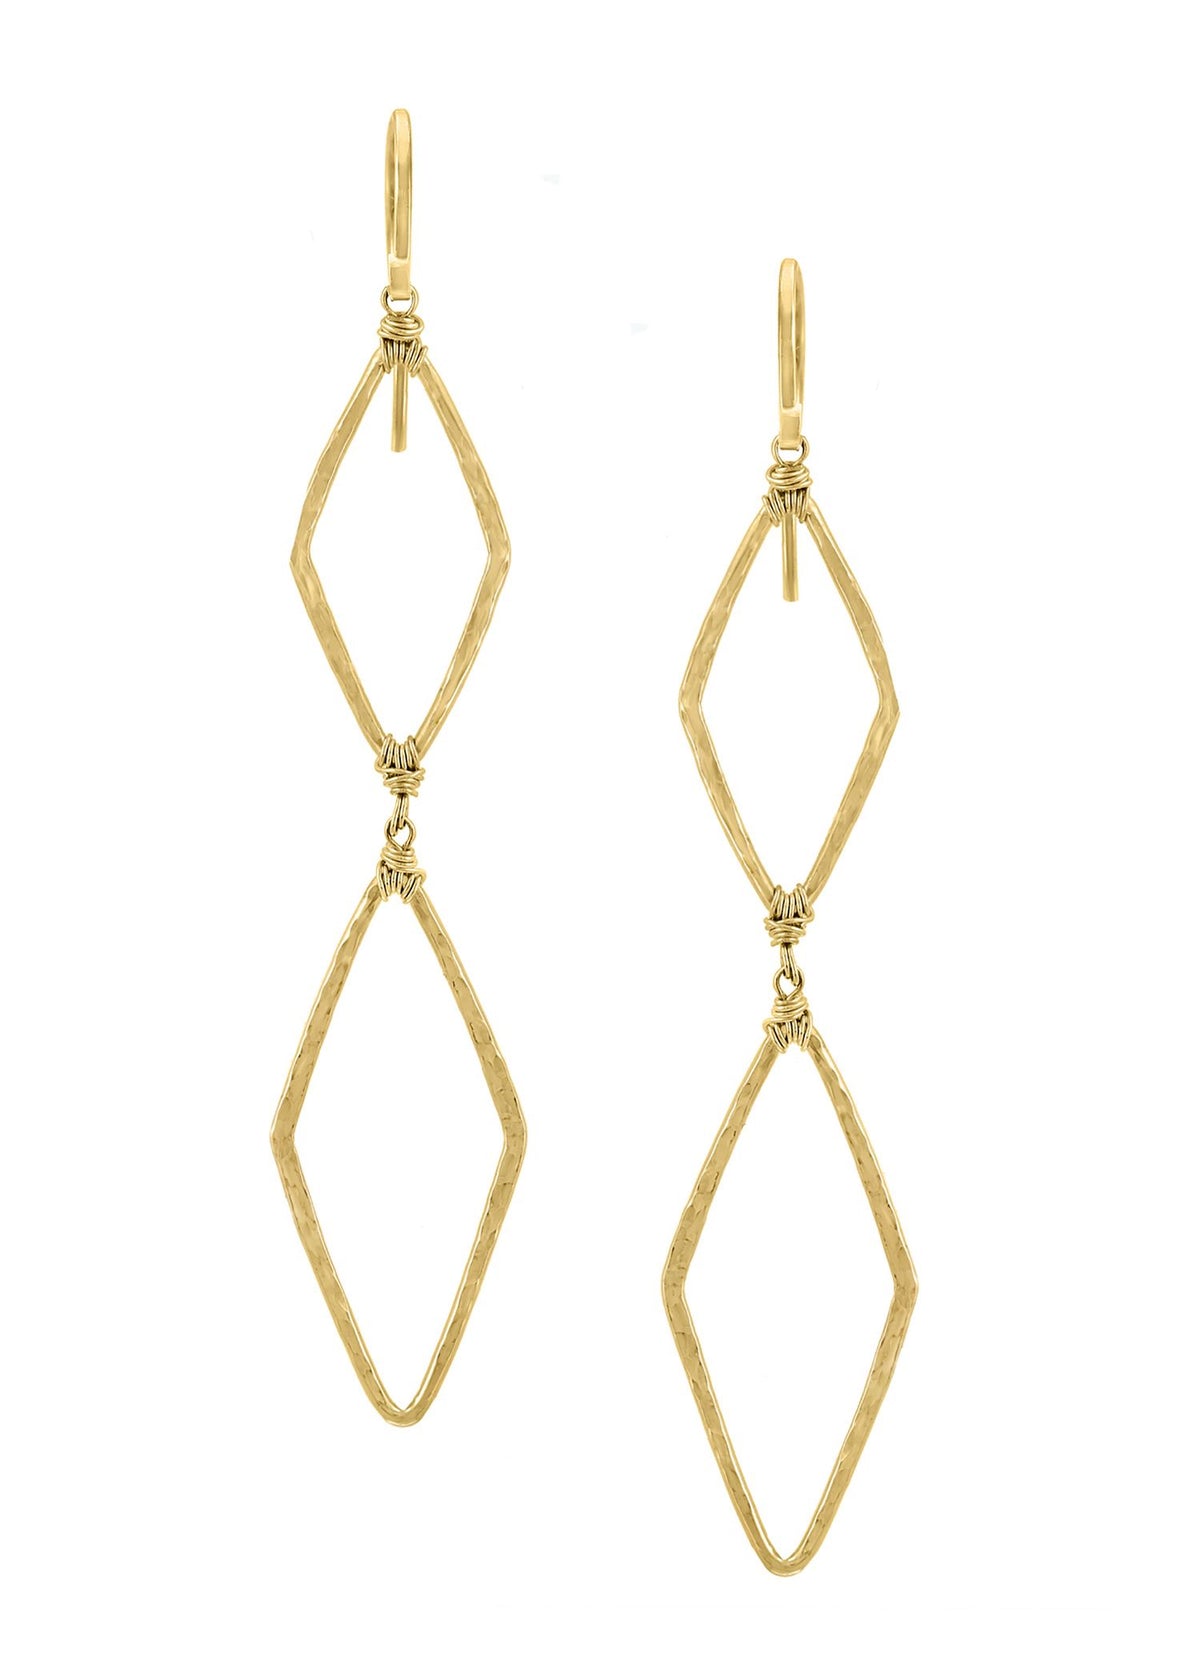 14k gold fill Earrings measure 2-3/4&quot; in length (including the ear wires) and 9/16&quot; in width Handmade in our Los Angeles studio